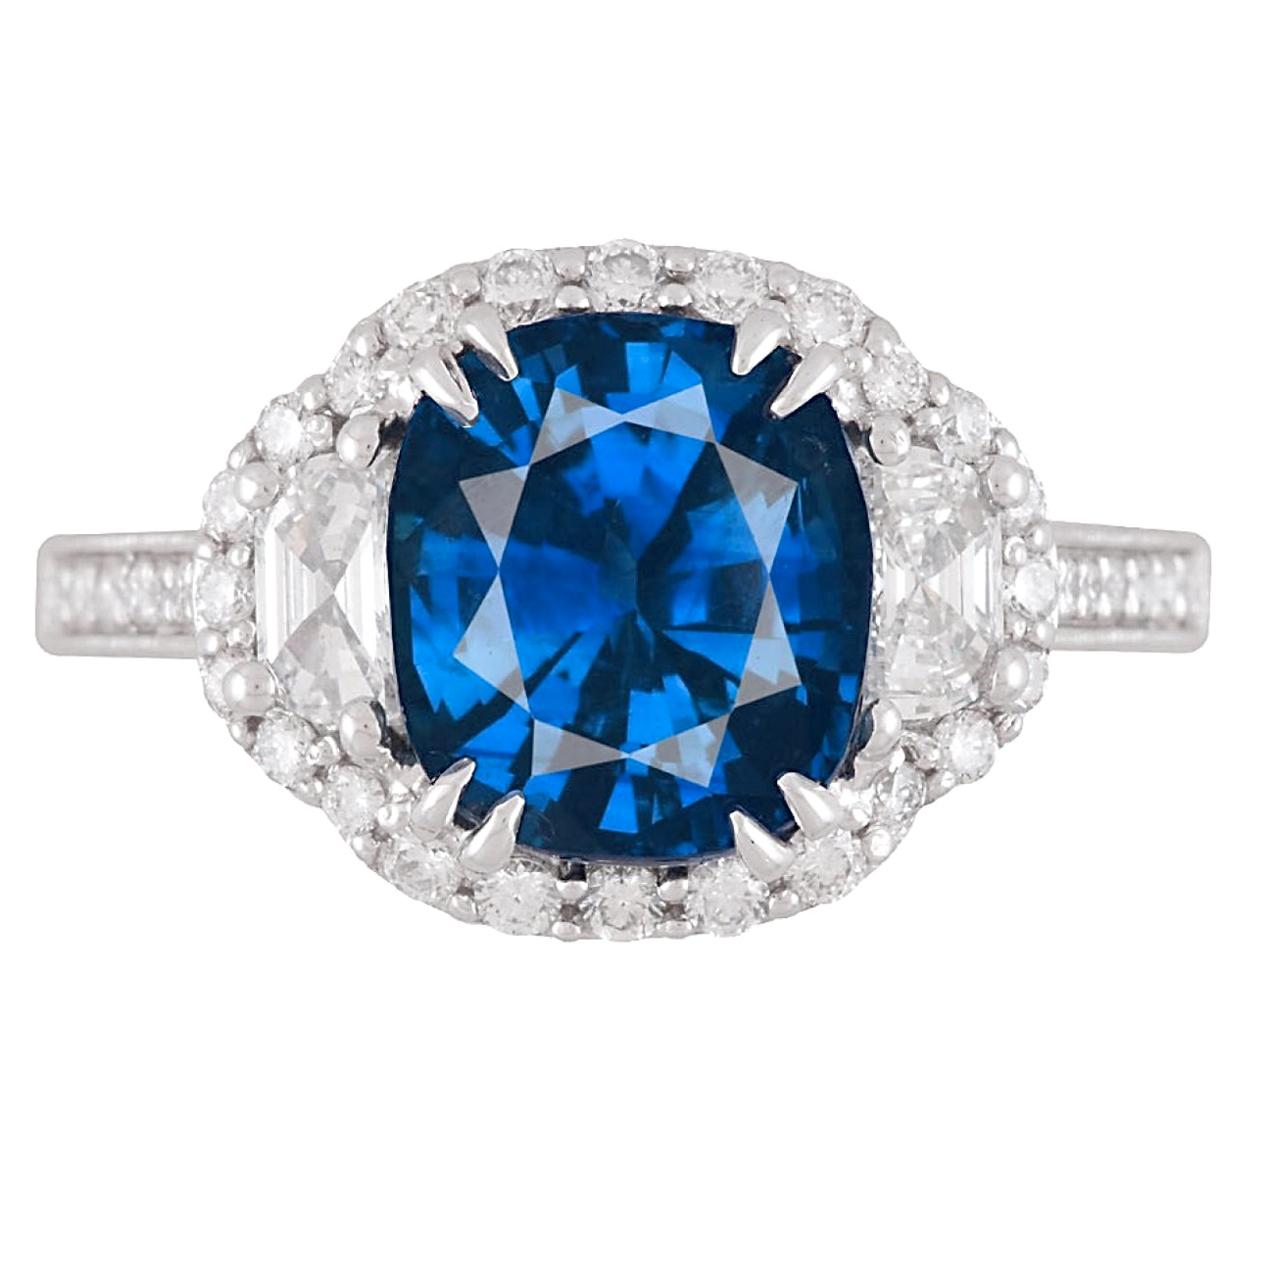 Contemporary GIA Certified 3.28 Ct Vivid Blue Cushion Cut Ceylon Sapphire Ring in 18k ref544 For Sale